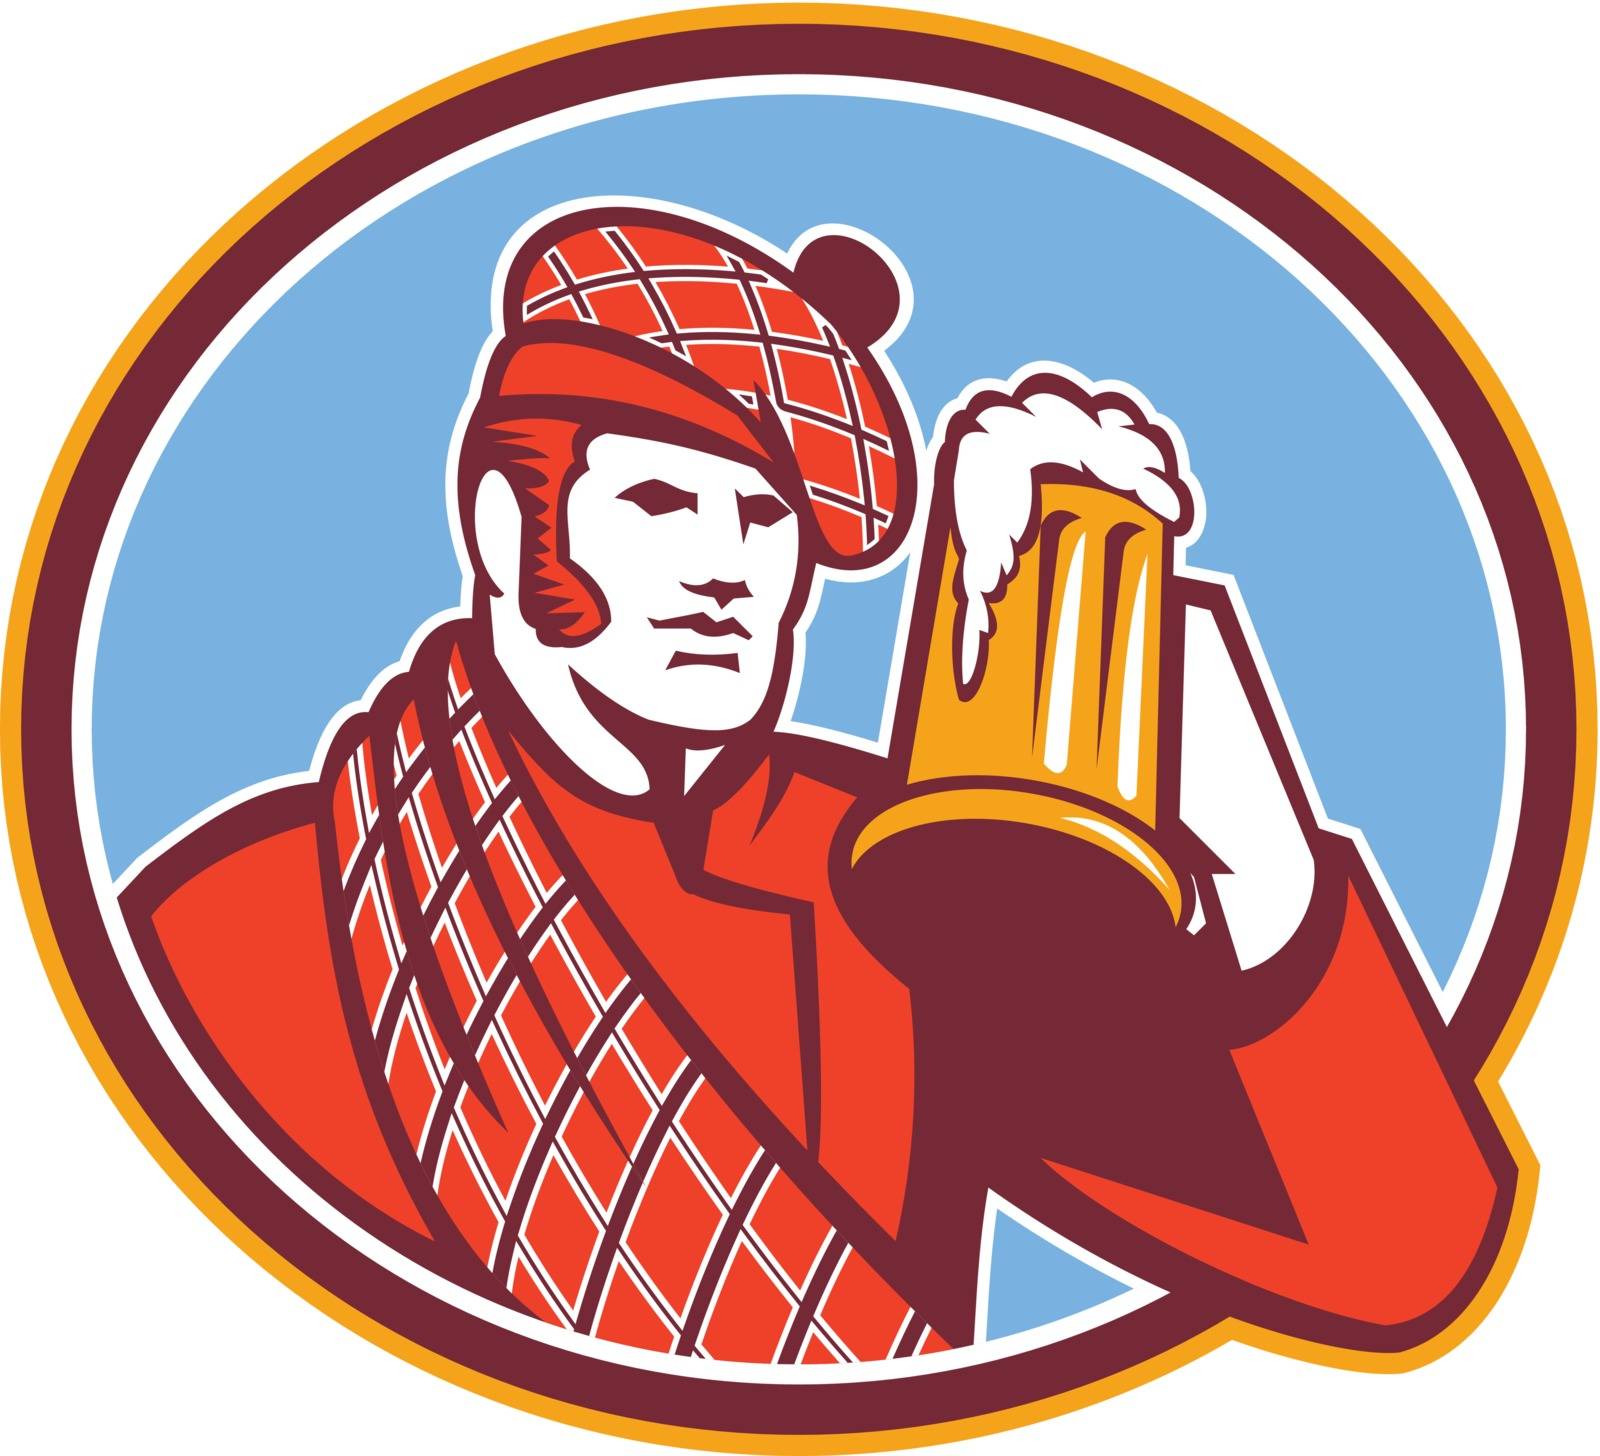 Illustration of a Scotsman Scottish beer drinker raising beer mug drinking looking up wearing tartan and beret hat set inside oval done in retro style.